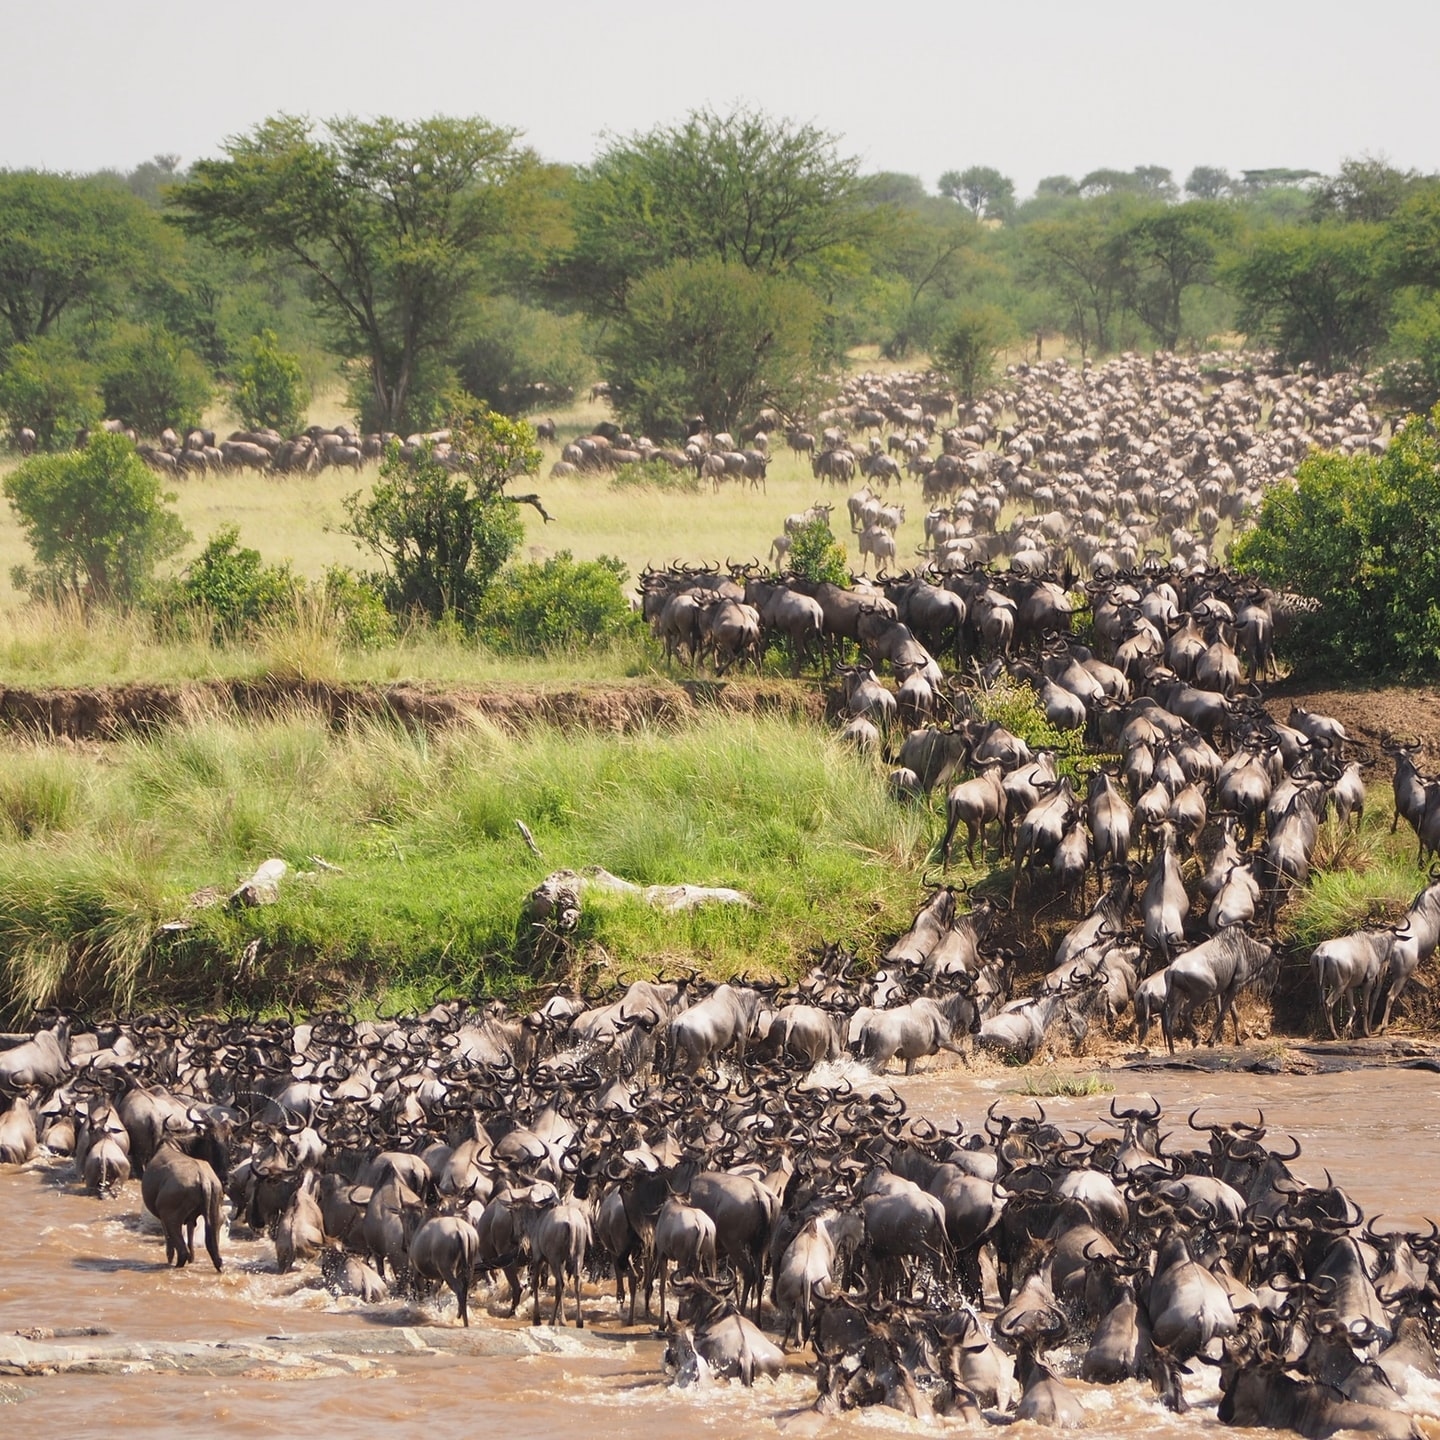 The Great Wildebeests Migration is the sight to experience at its best.

And the time is now to book your safari and experience such a wonderful and memorable event.

Book with us
📧 info@makoyesafaris.com
🌐 https://www.makoyesafaris.com

#serengetinationalpark #sorry_yesterday #lifesituation #grouptravel #luxurytravel #solotraveler #wonderlust #emotions #worldtour #chinatravels #love #nomadlife #instatravel #unitedarabemirate #italy #worldtraveler #voyage #travelnut #travelgirl #travelblogger #storyteller #unitedstates #travelnurses #familytravel #travel #photography #nature #lonely #naturephotograph #serenity